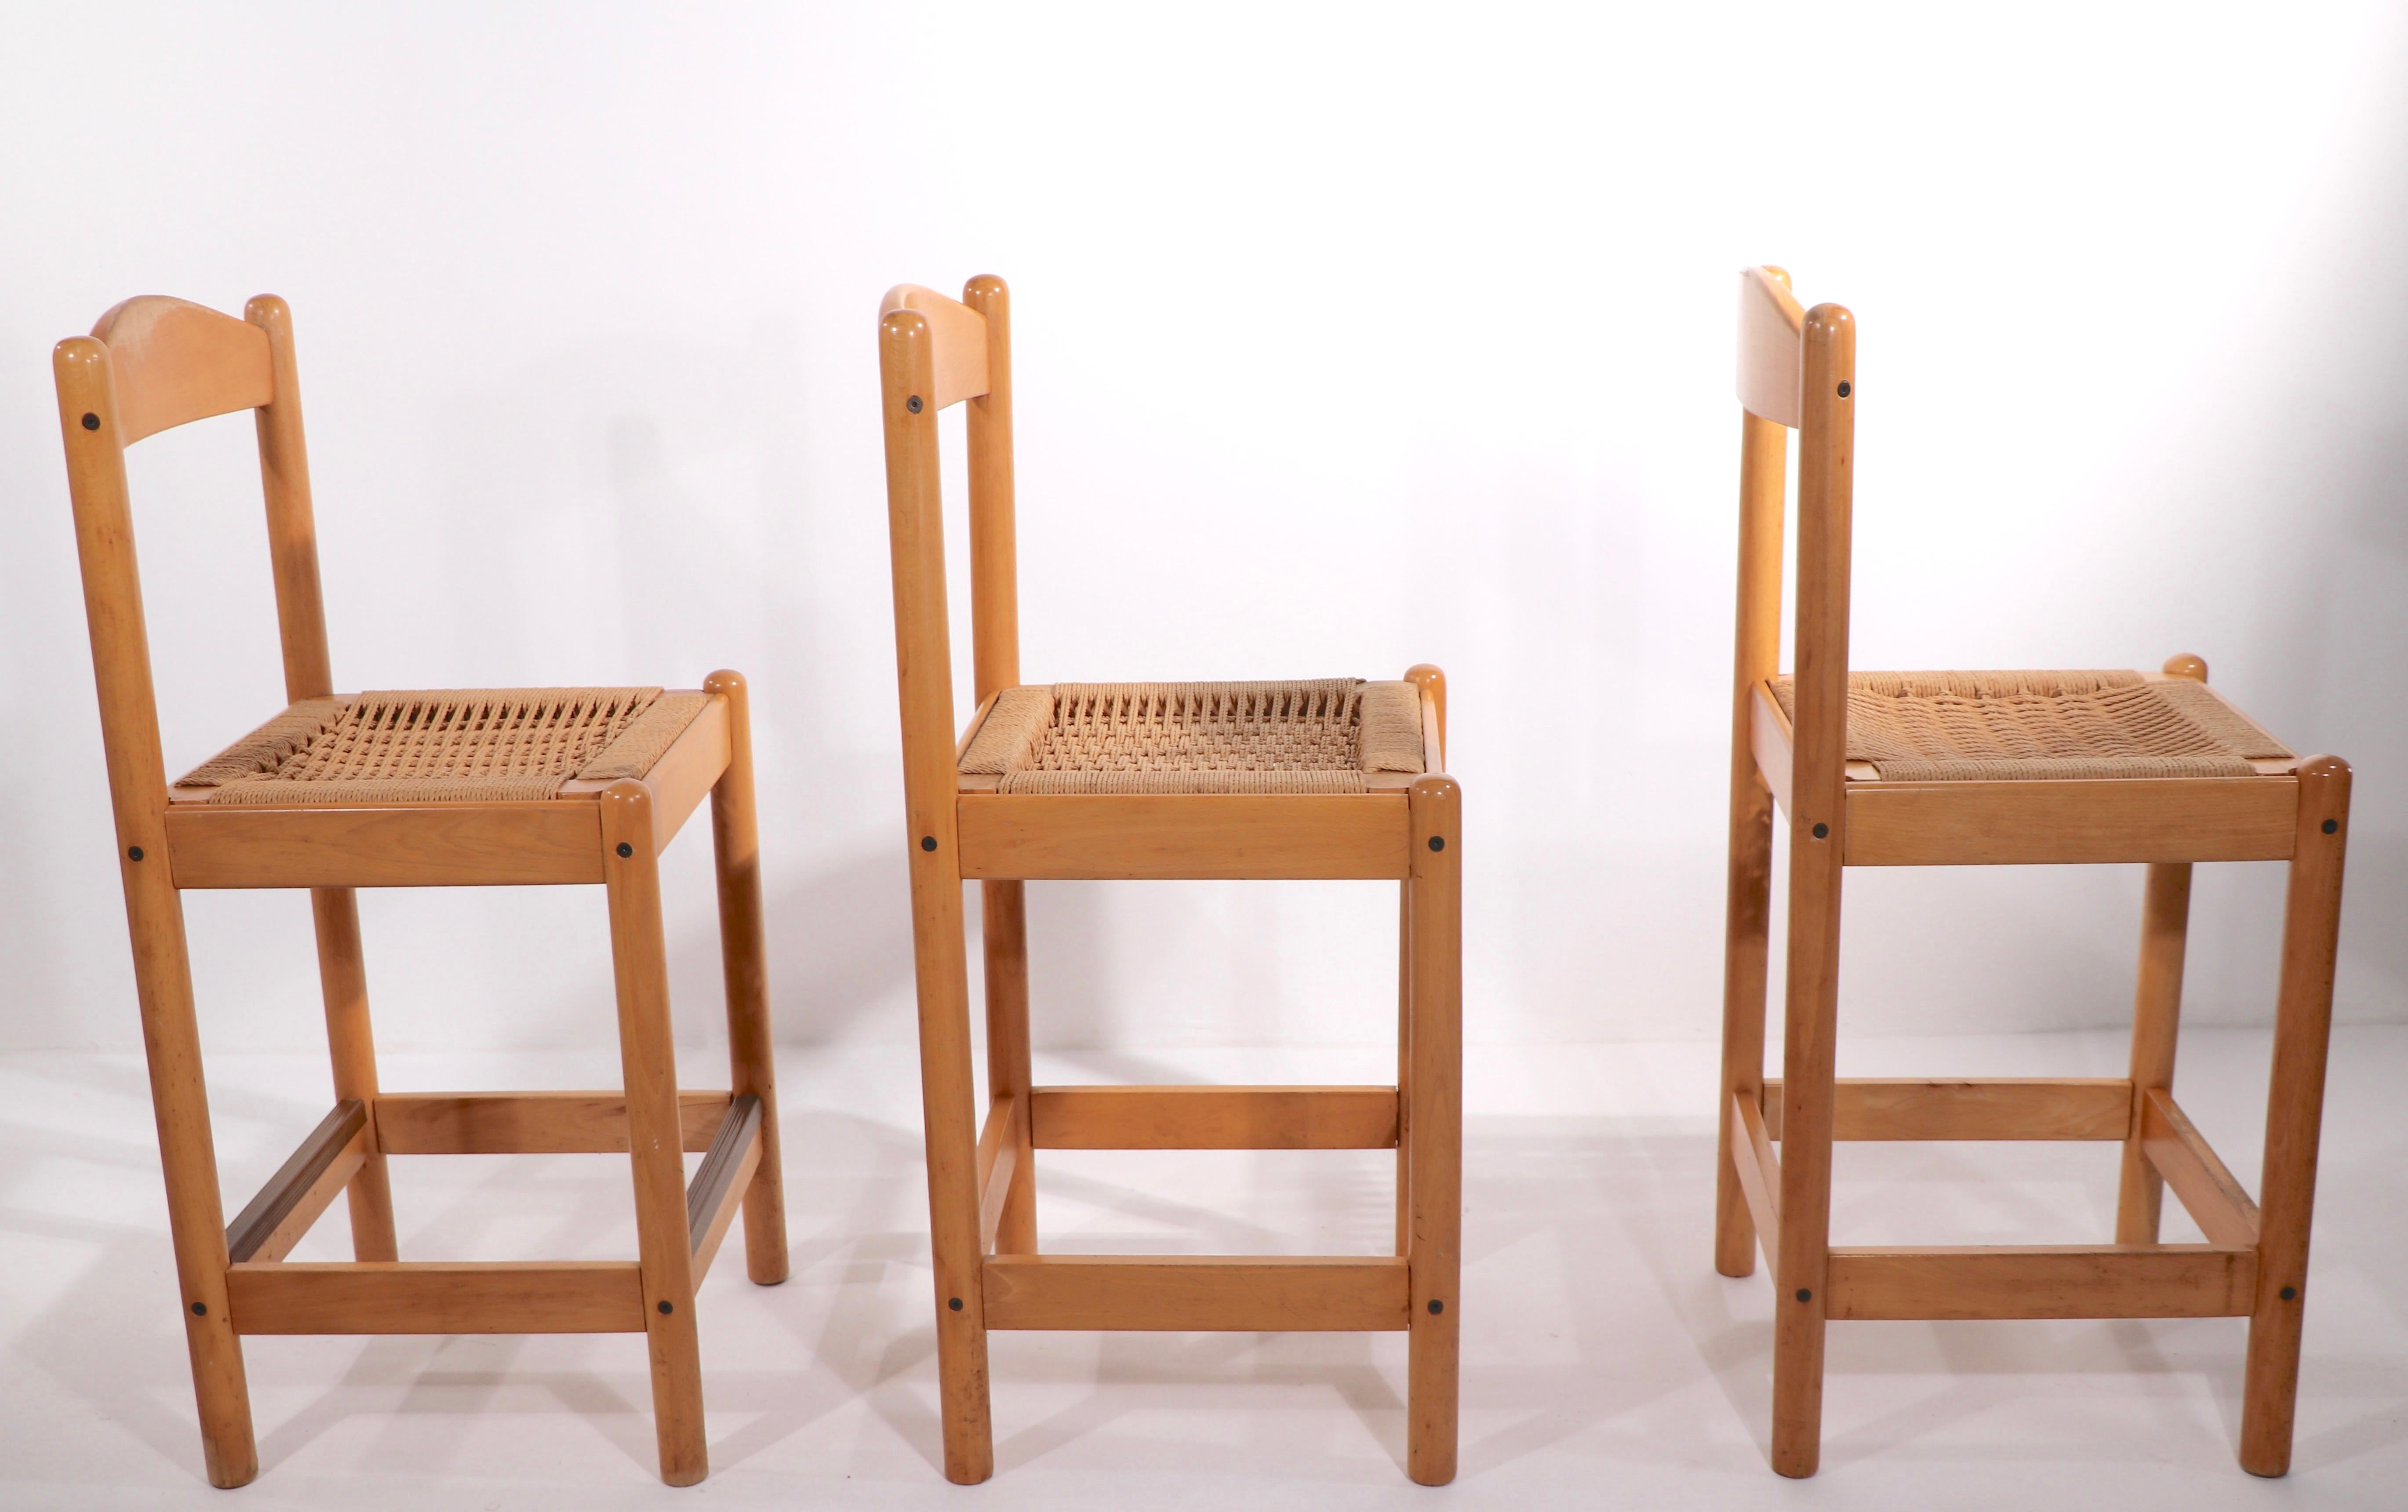 3 Post Modern Blonde Beechwood Stools Made in Italy 3